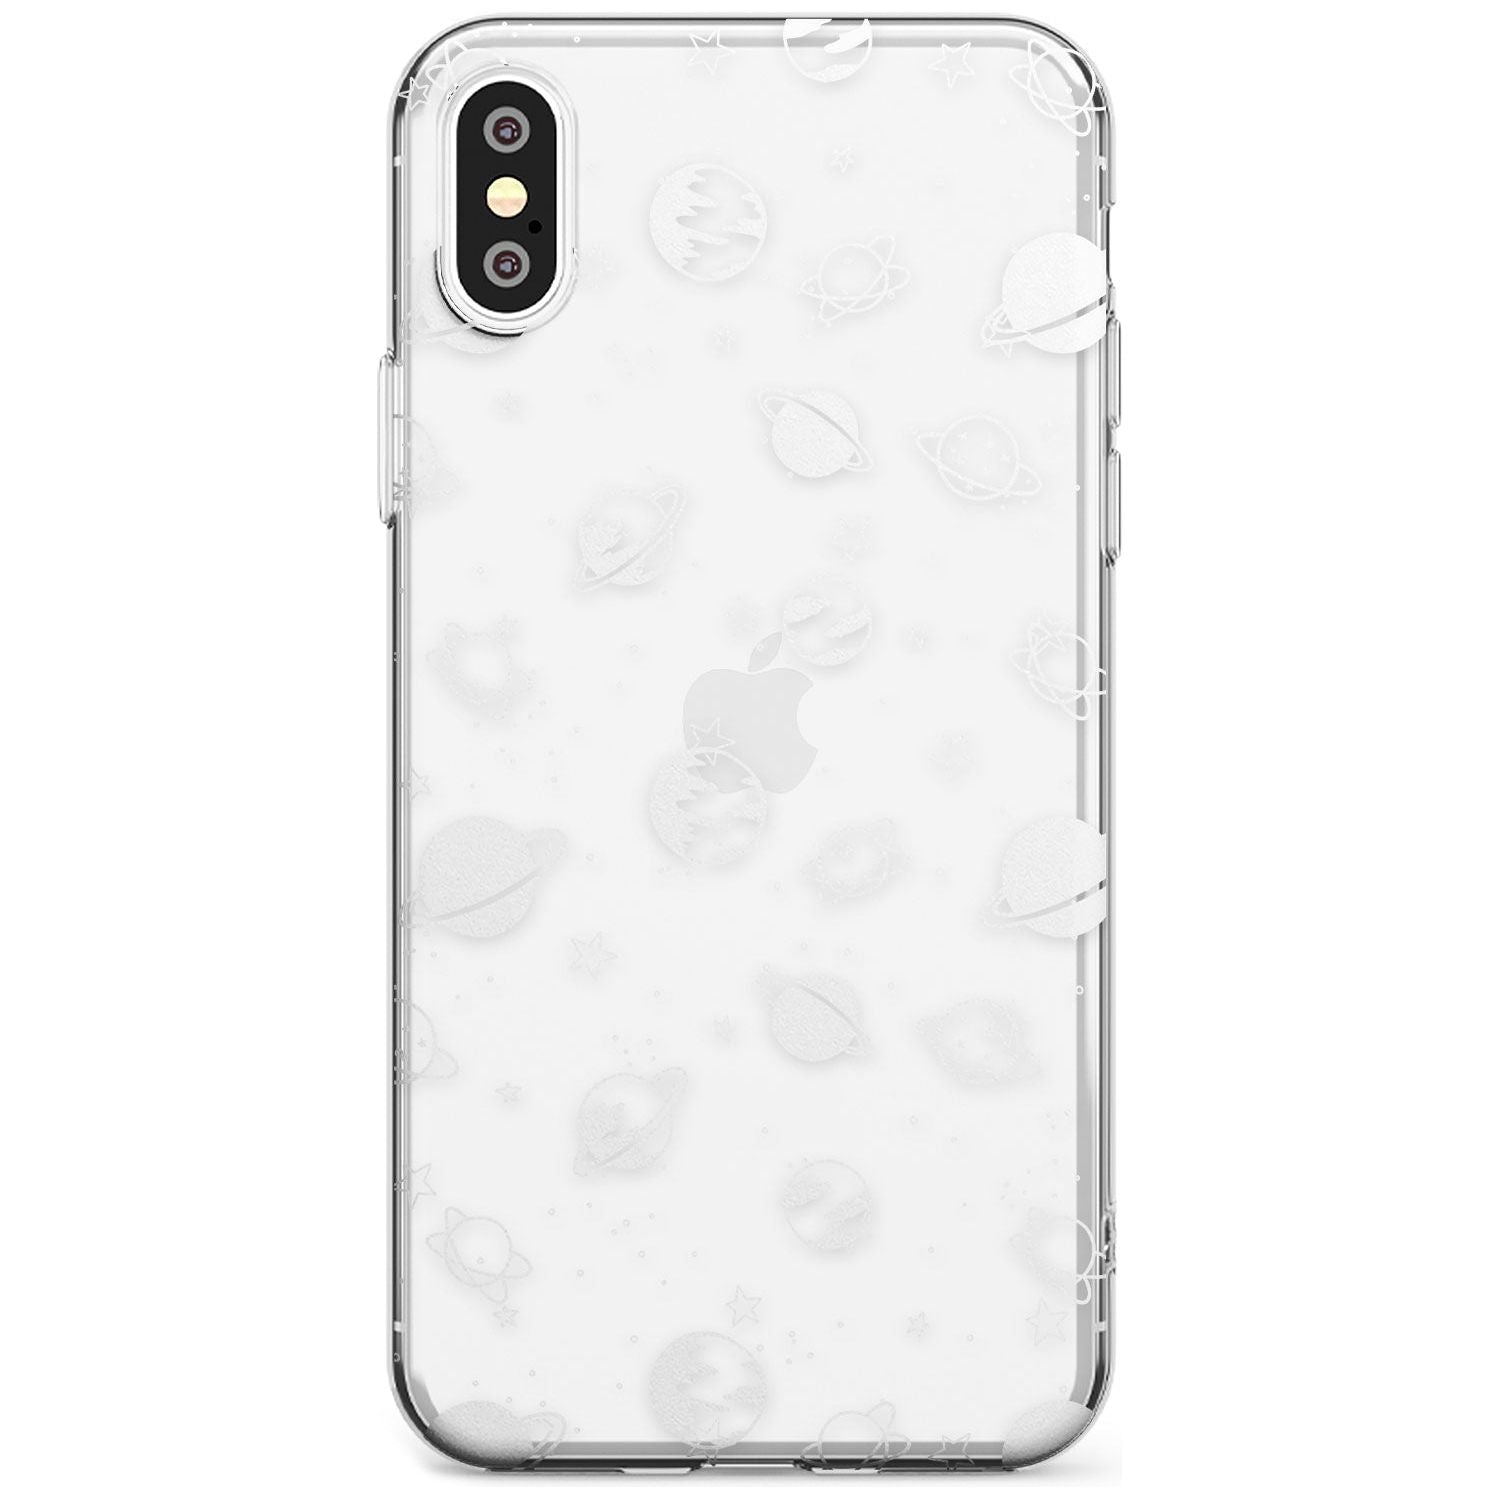 White Planets on Clear Black Impact Phone Case for iPhone X XS Max XR